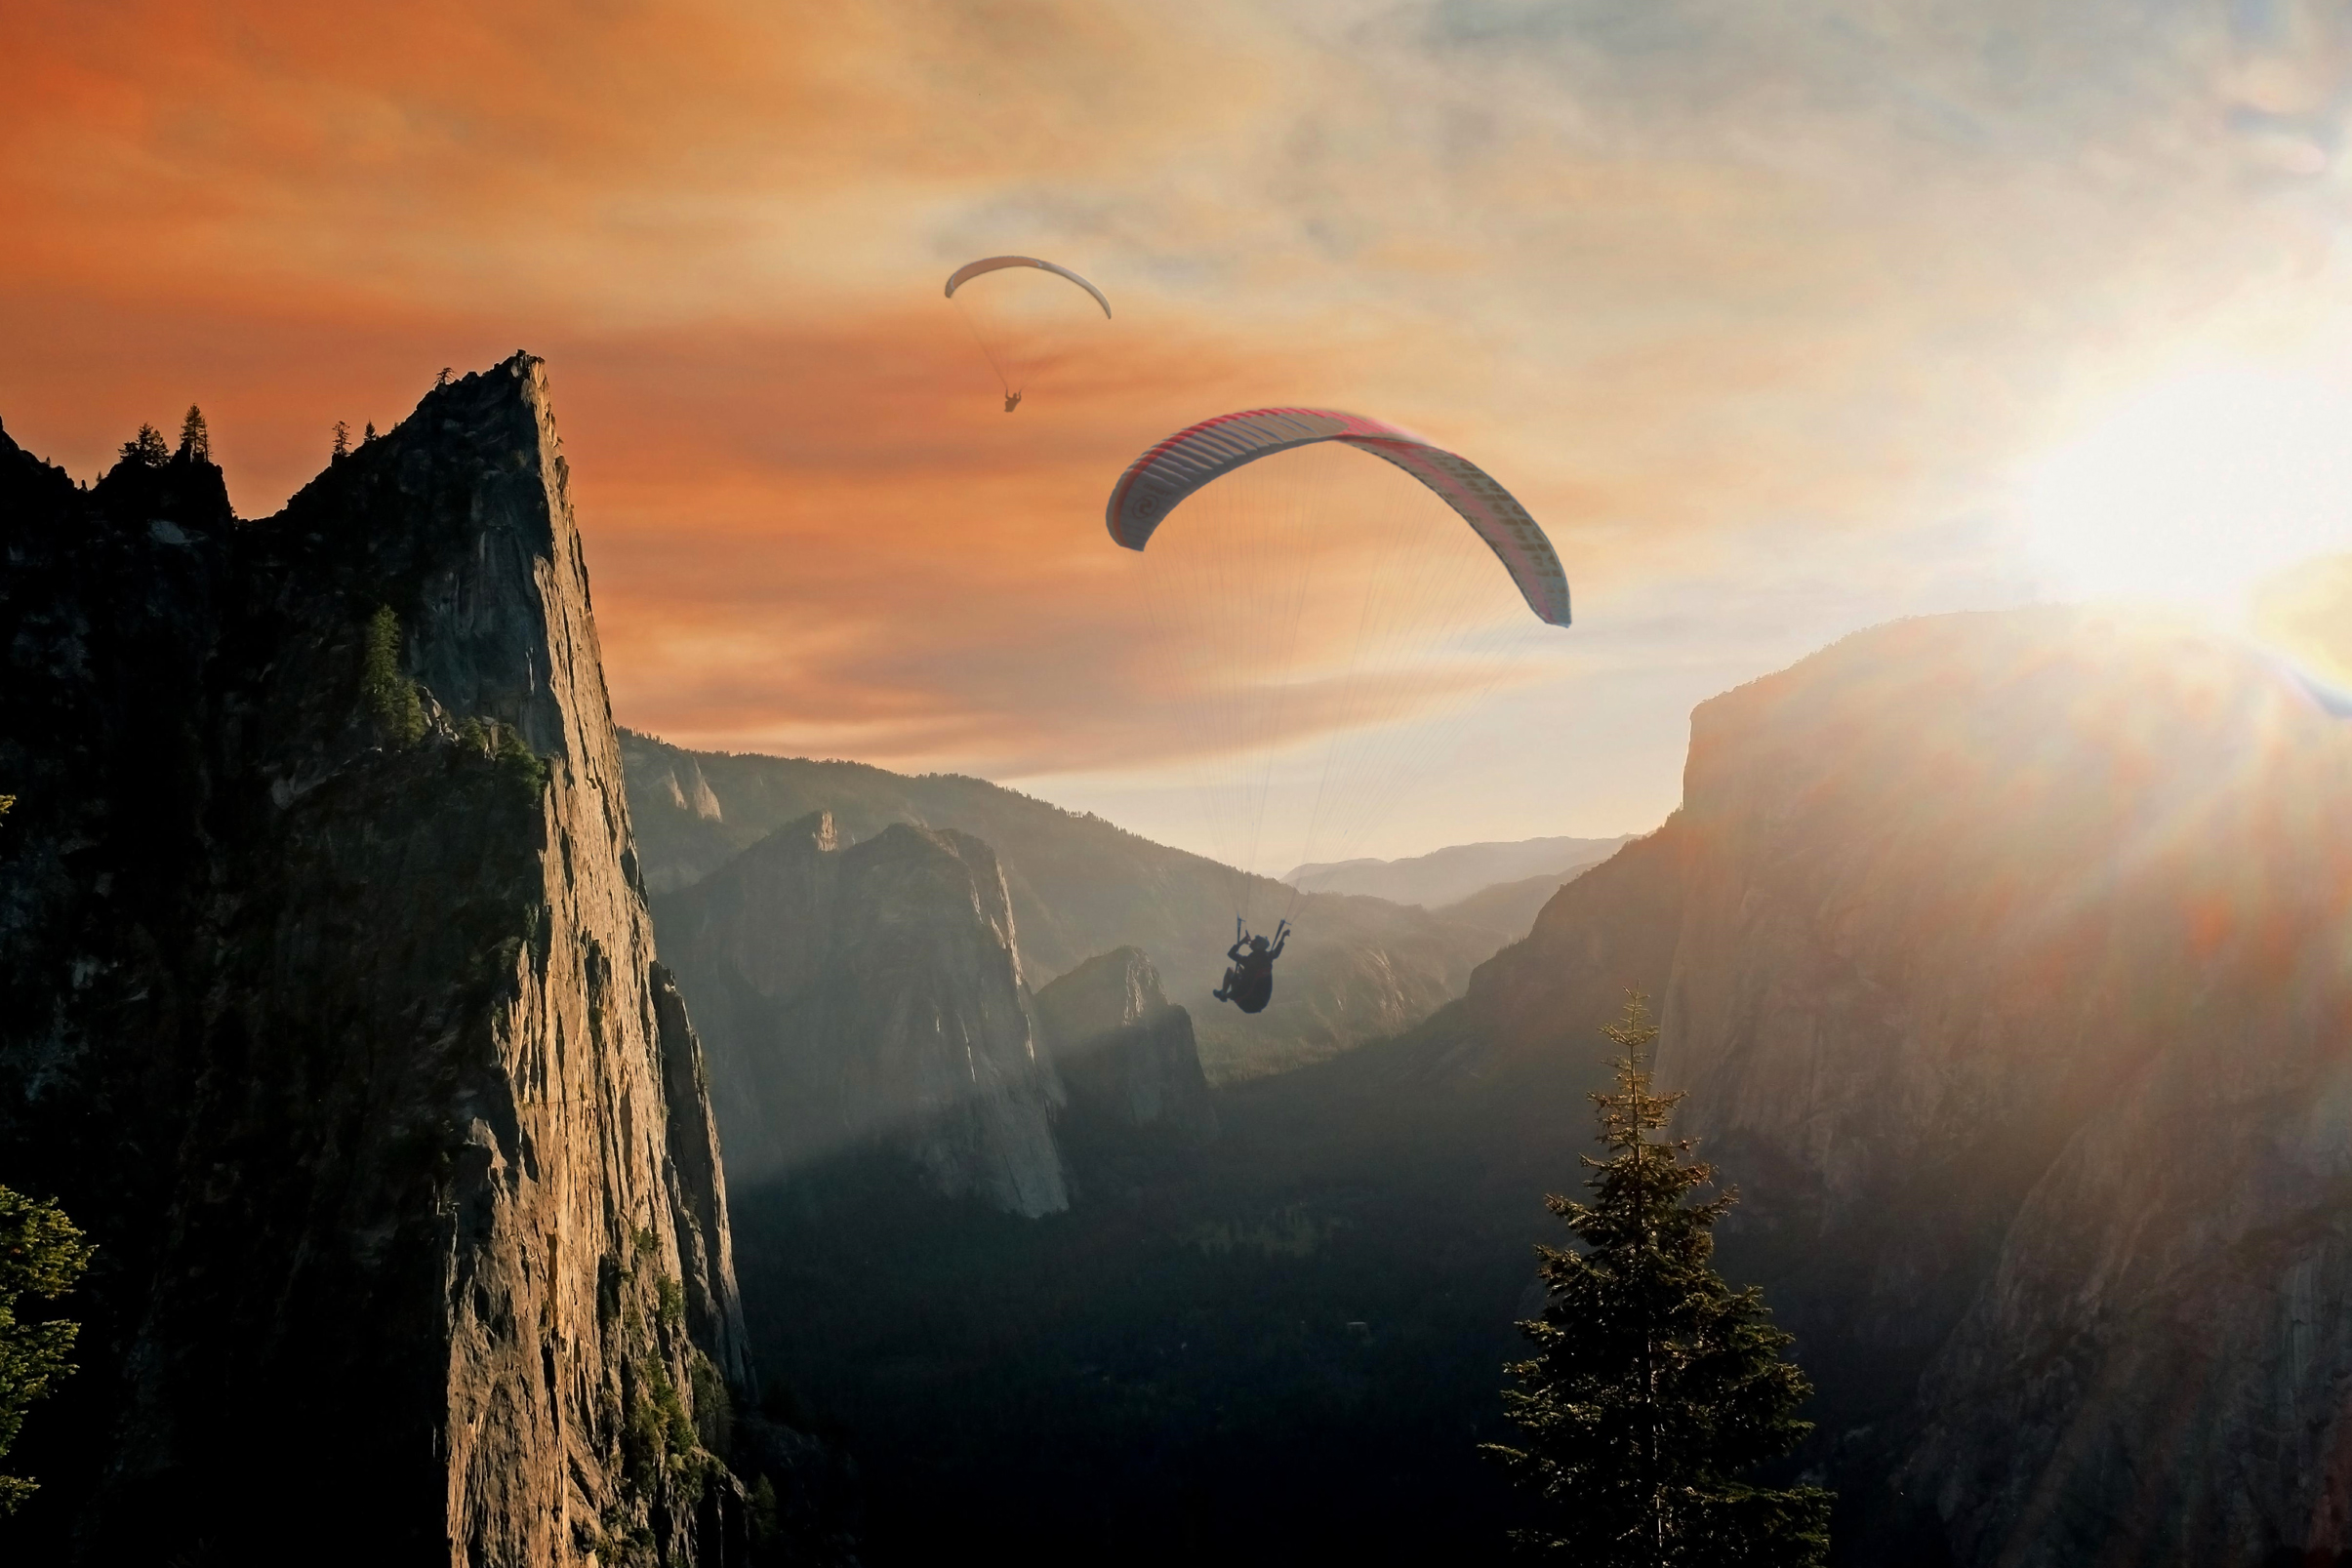 Into the air, Action, Recreation, Mountains, Nature, HQ Photo